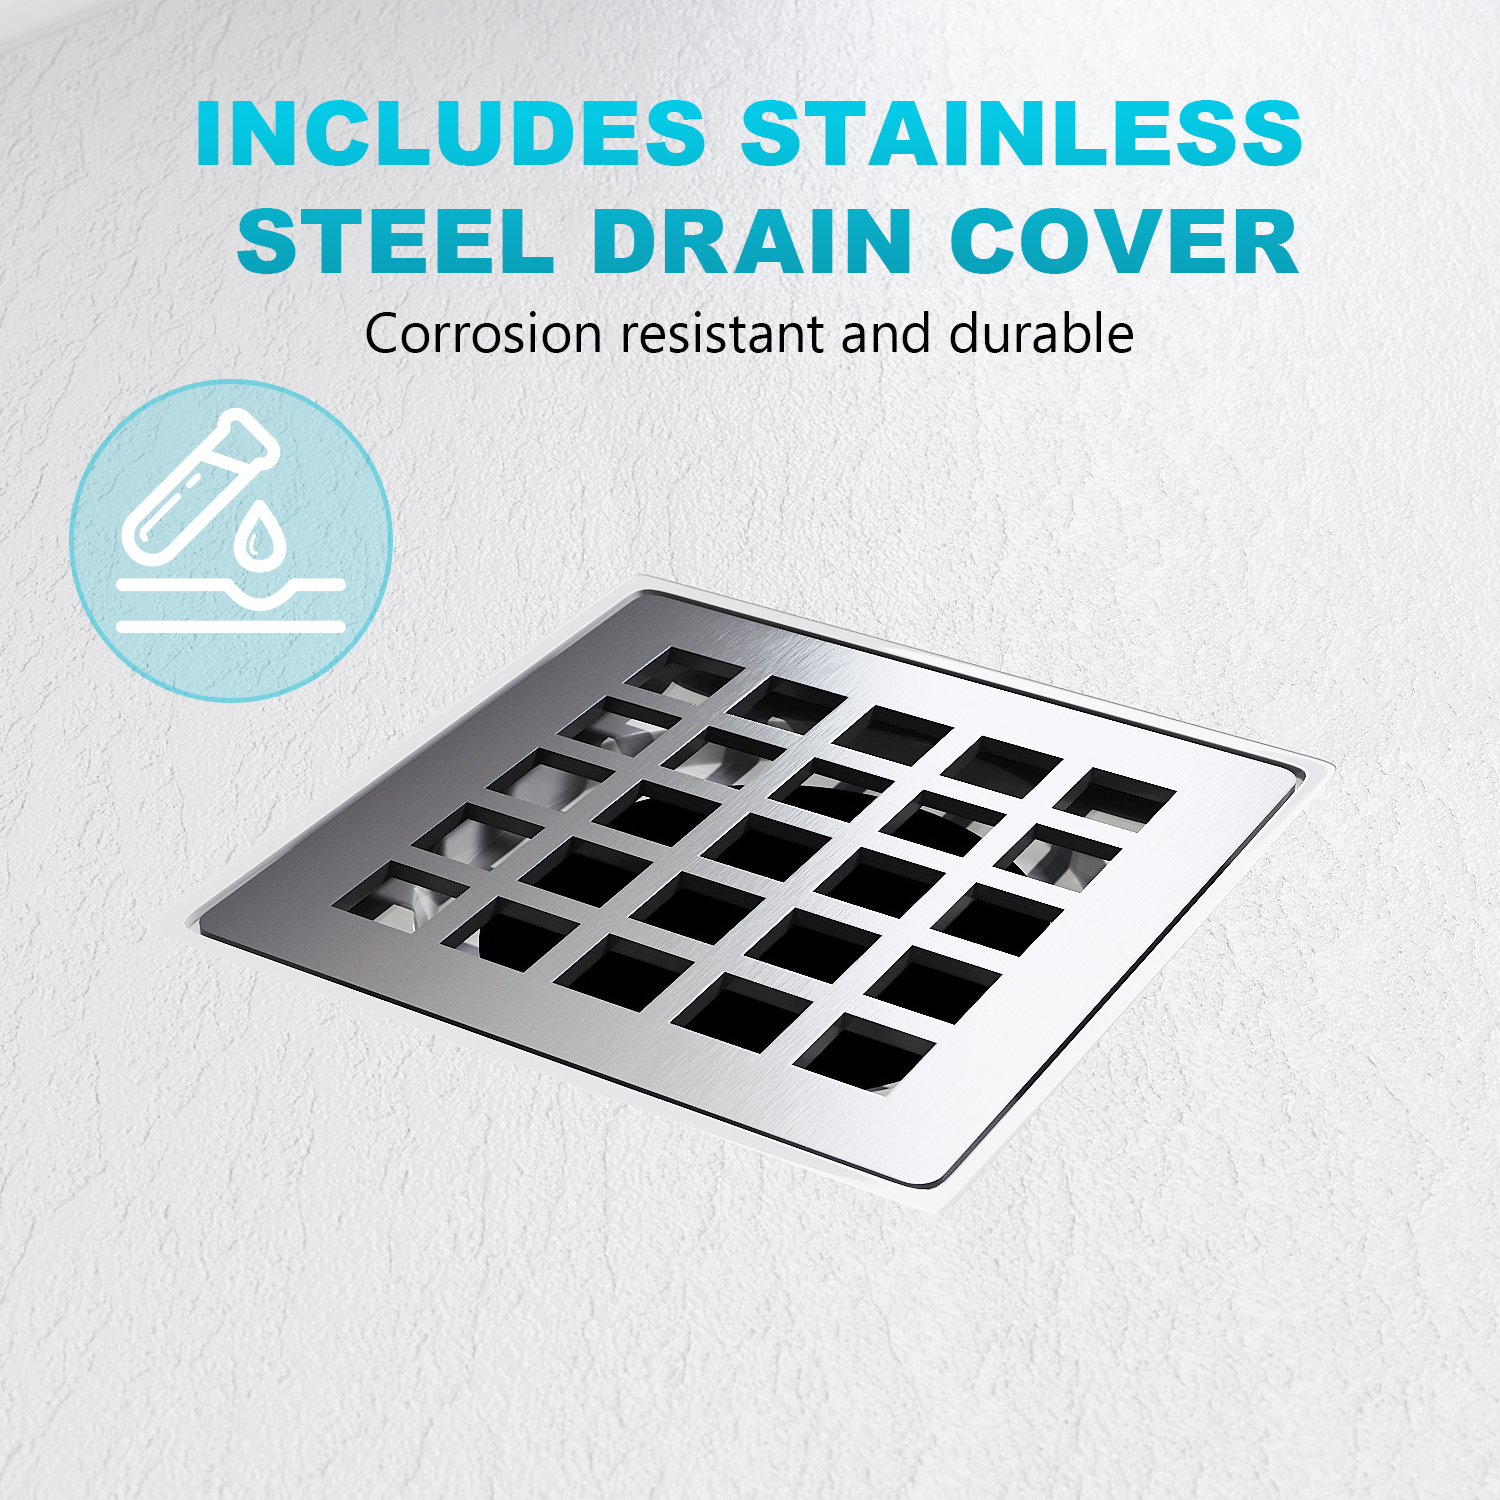 SMC Shower Tray Features：